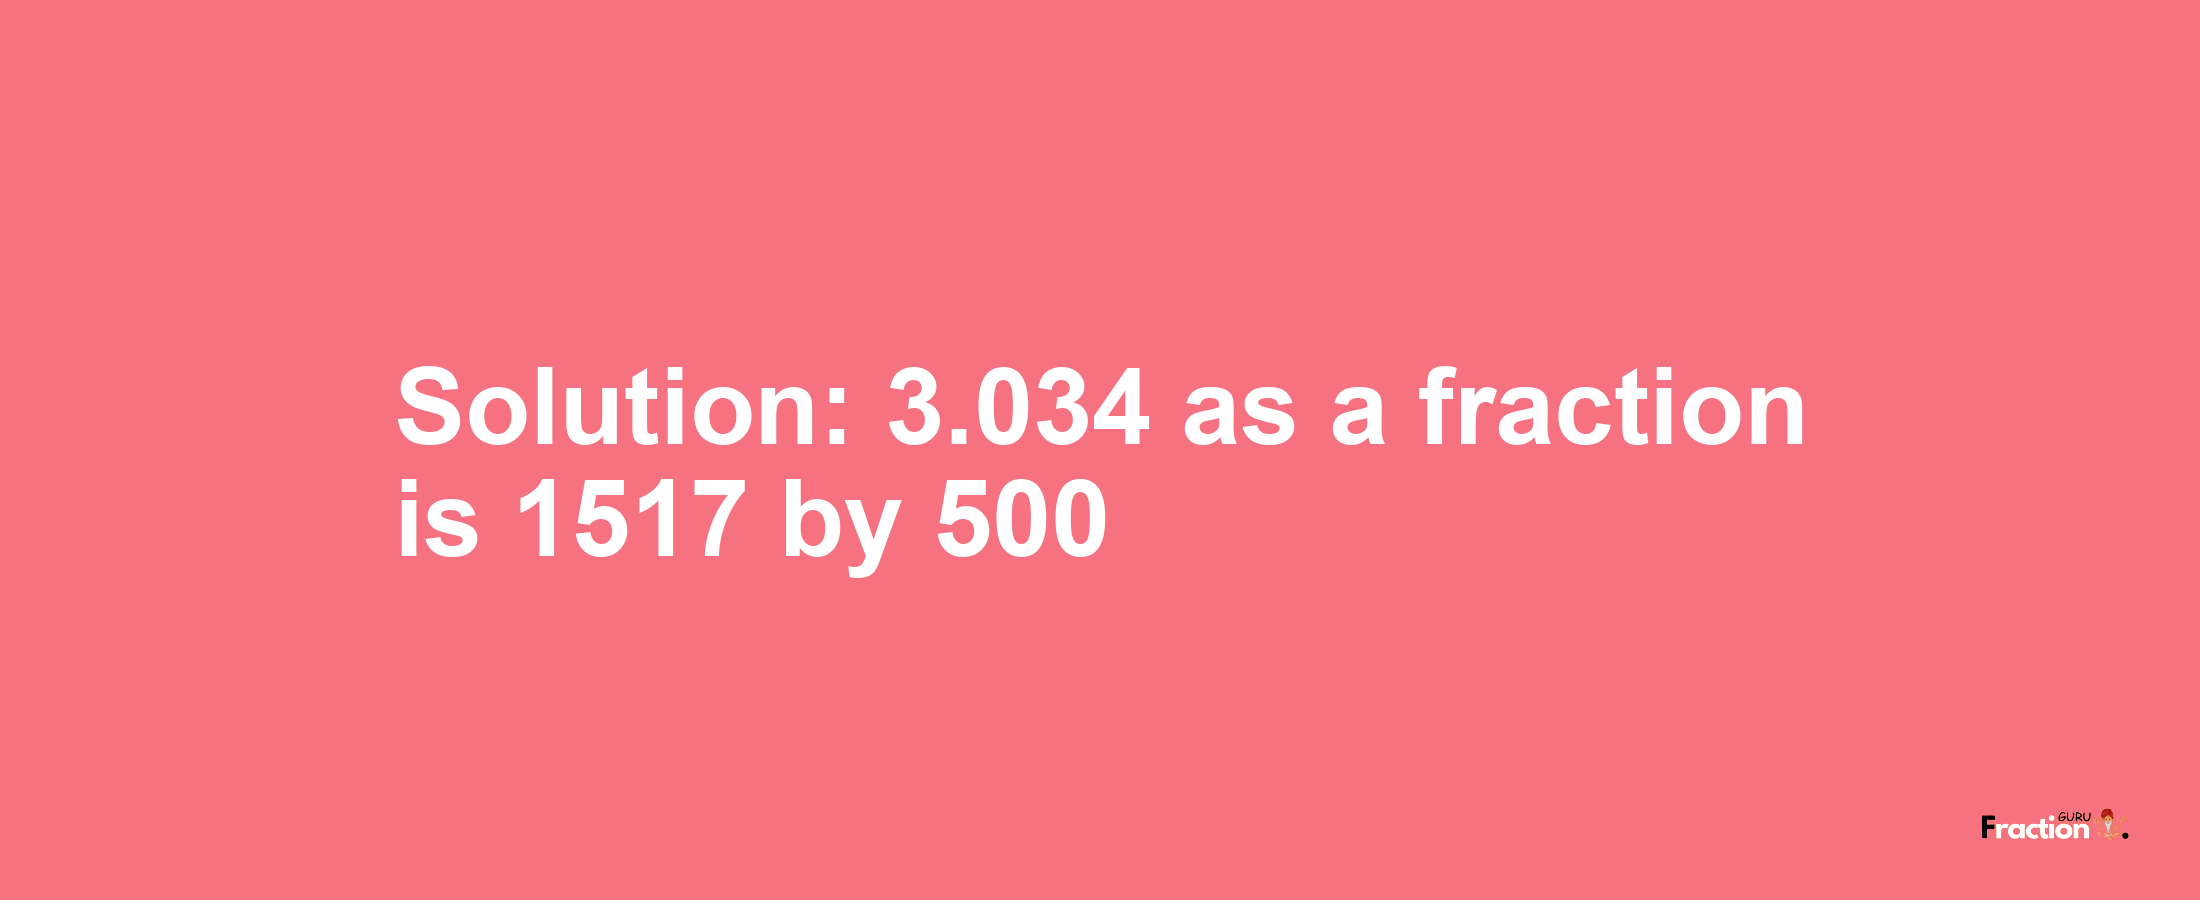 Solution:3.034 as a fraction is 1517/500